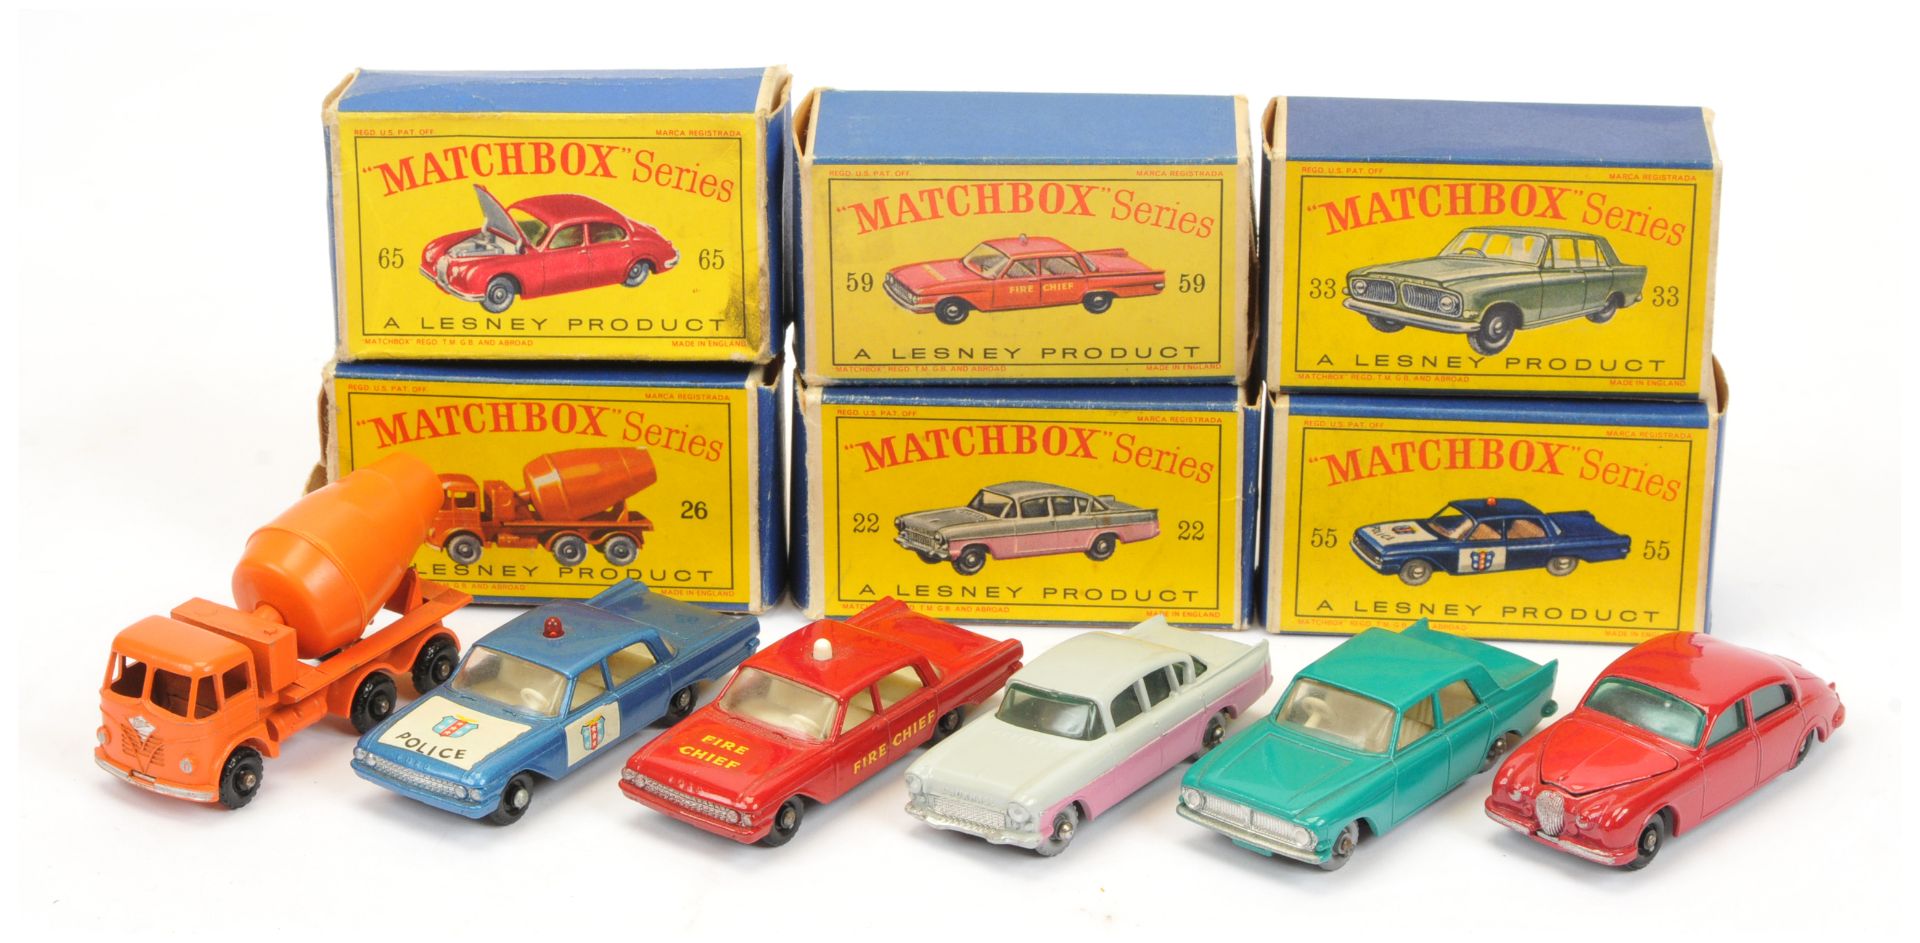 Matchbox Regular Wheels group to include 55b Ford Fairlane Police Car - metallic blue body with r...